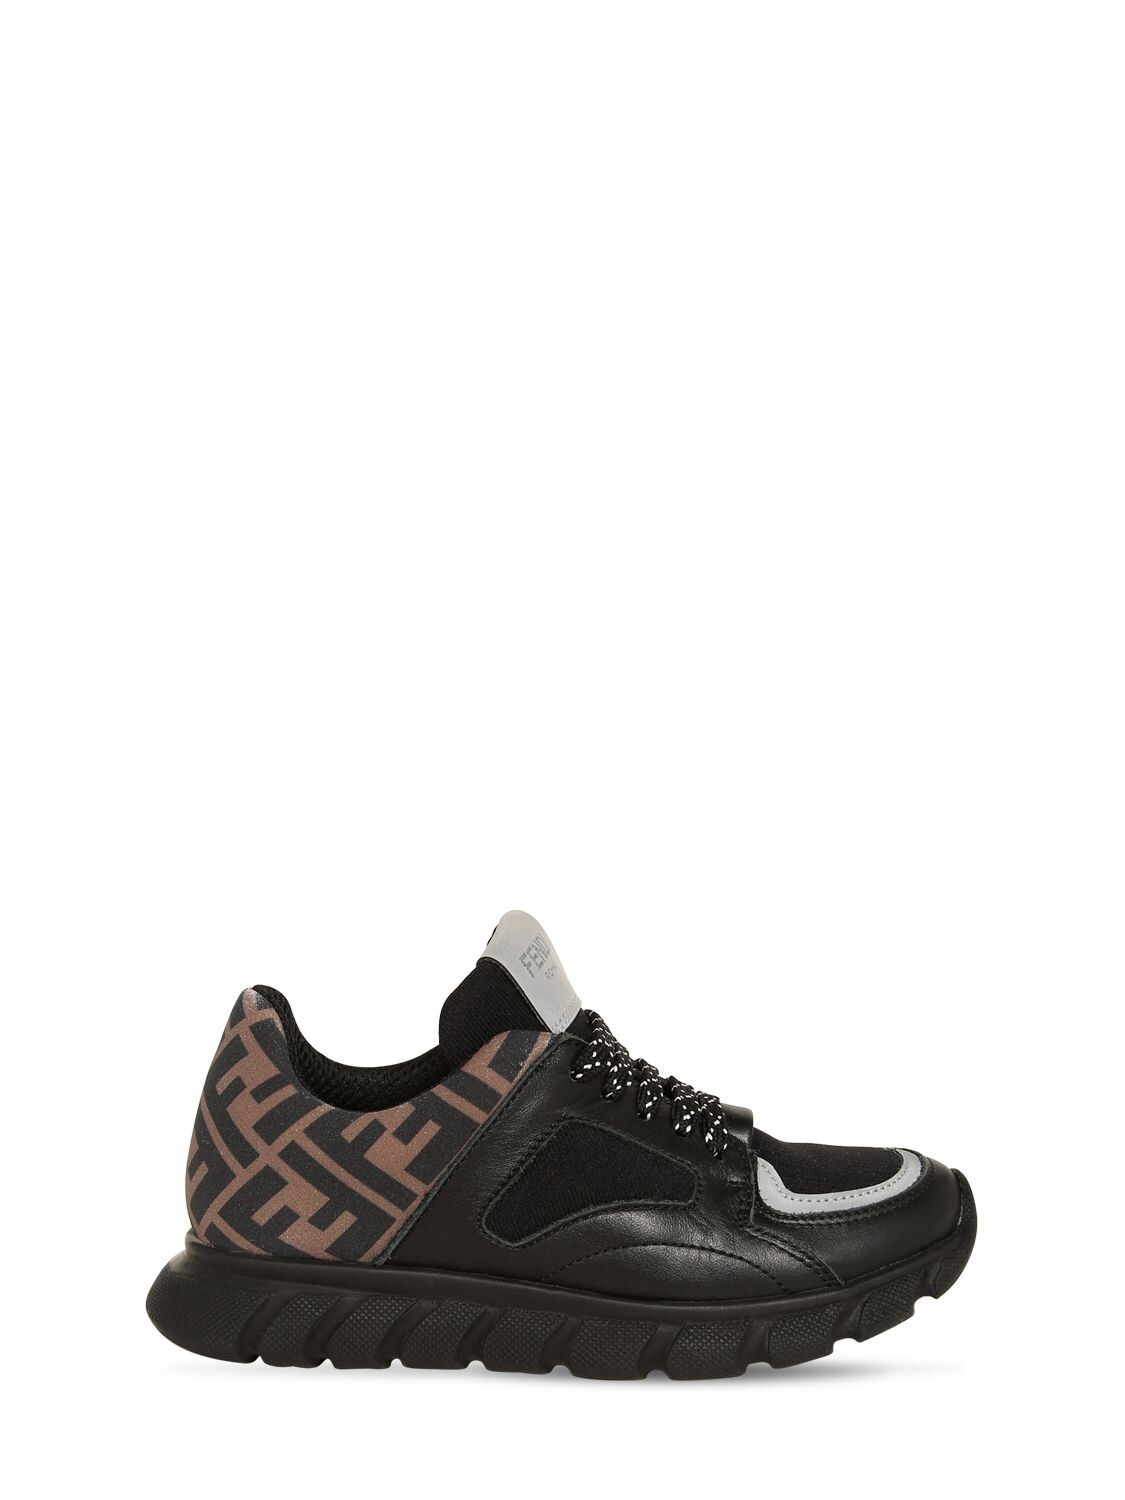 FENDI NEOPRENE & LEATHER LACE-UP SNEAKERS,71I6SY048-RJEZQ1Y1